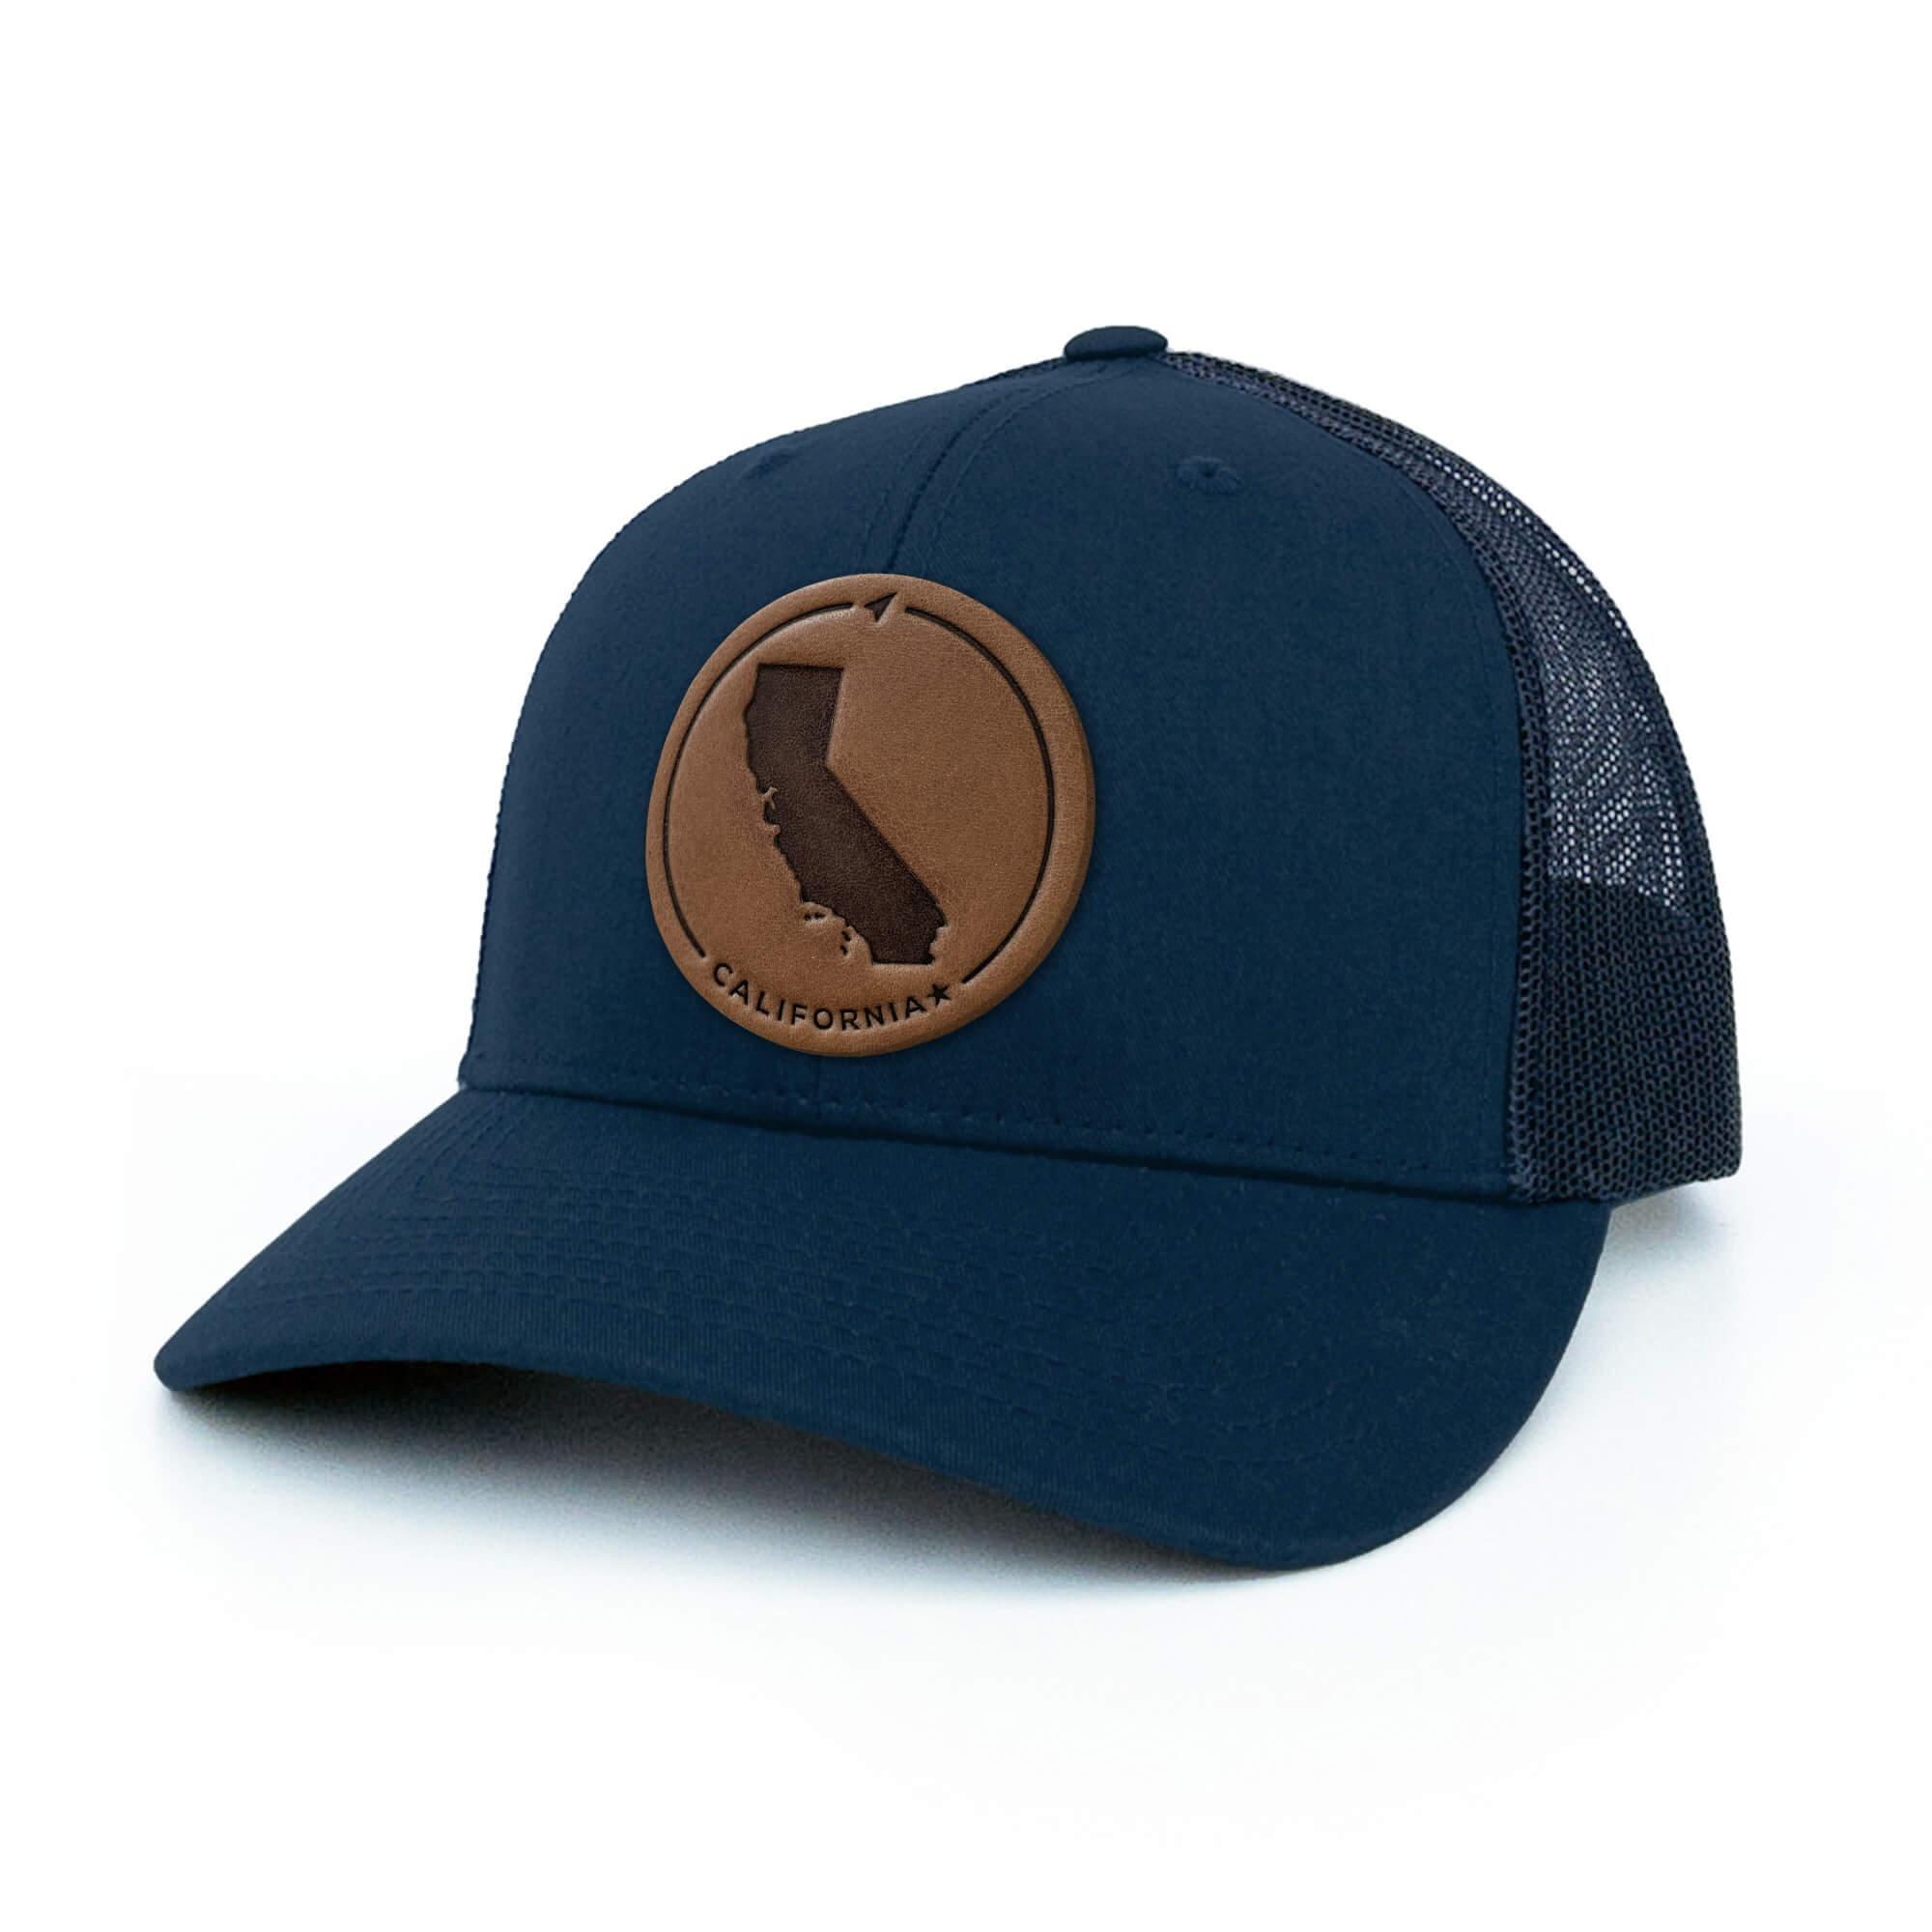 Navy trucker hat with full-grain leather patch of California | BLACK-003-011, CHARC-003-011, NAVY-003-011, HGREY-003-011, MOSS-003-011, BROWN-003-011